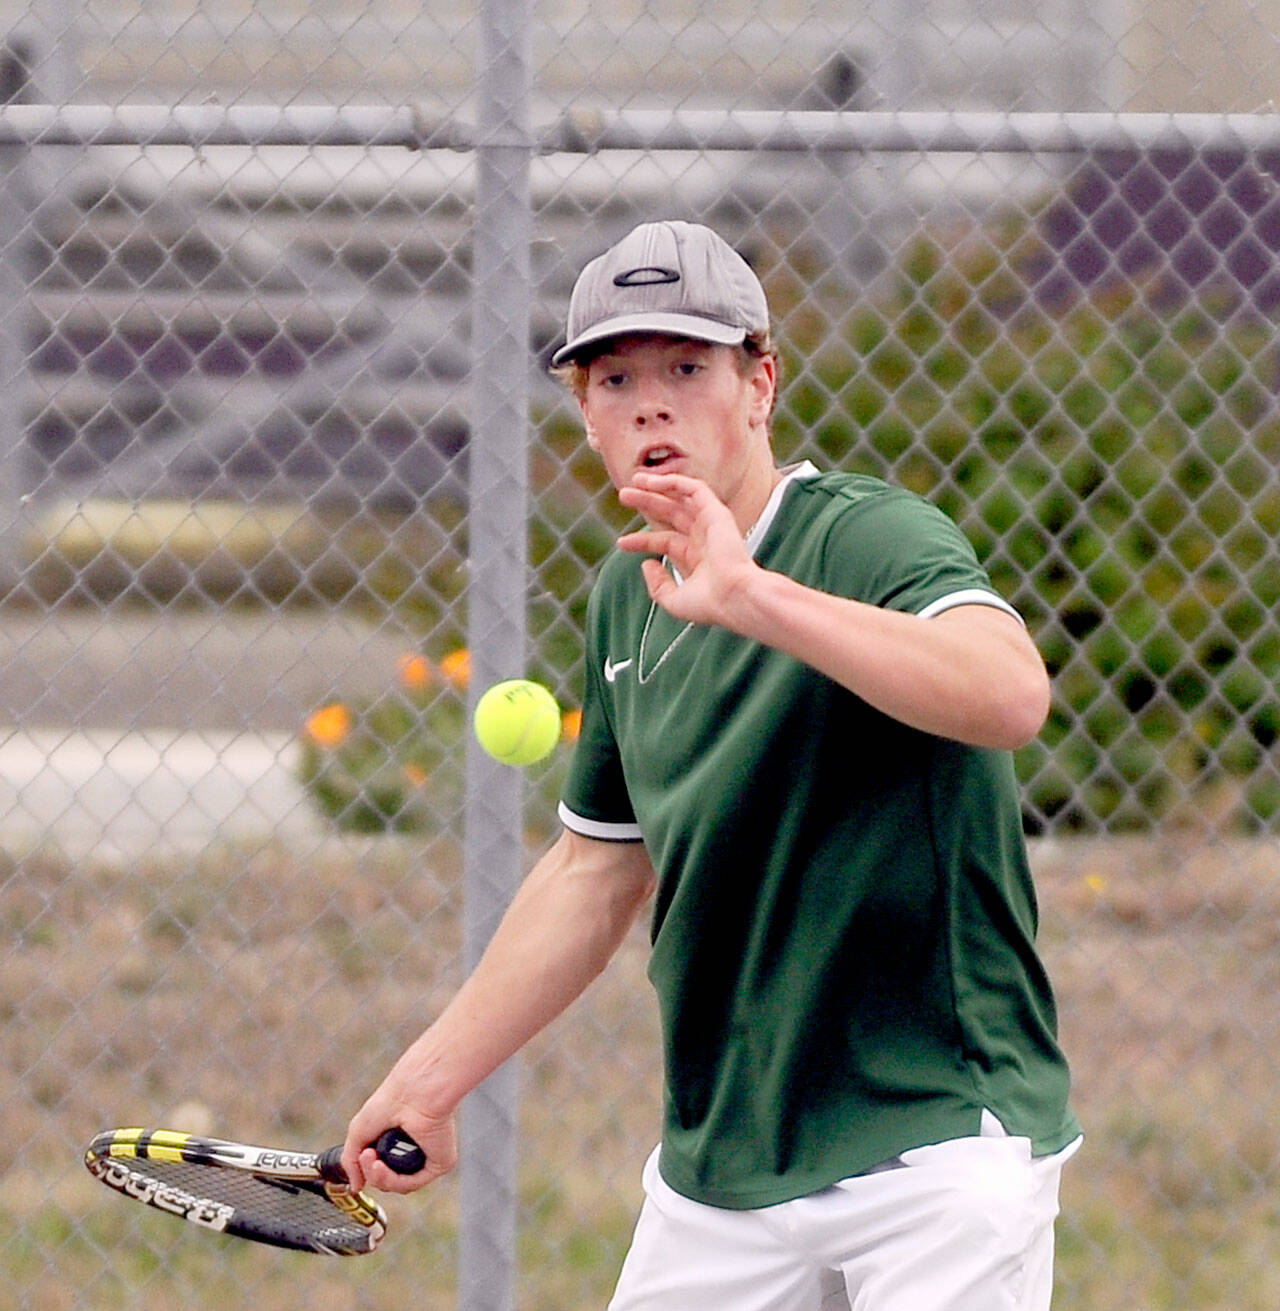 Group Port Angeles’ Reef Gelder returns a volley during his No. 1 singles match with Sequim’s Garrett Little on Thursday. Little and the Wolves won the match 4-3. (Michael Dashiell/Olympic Peninsula News)